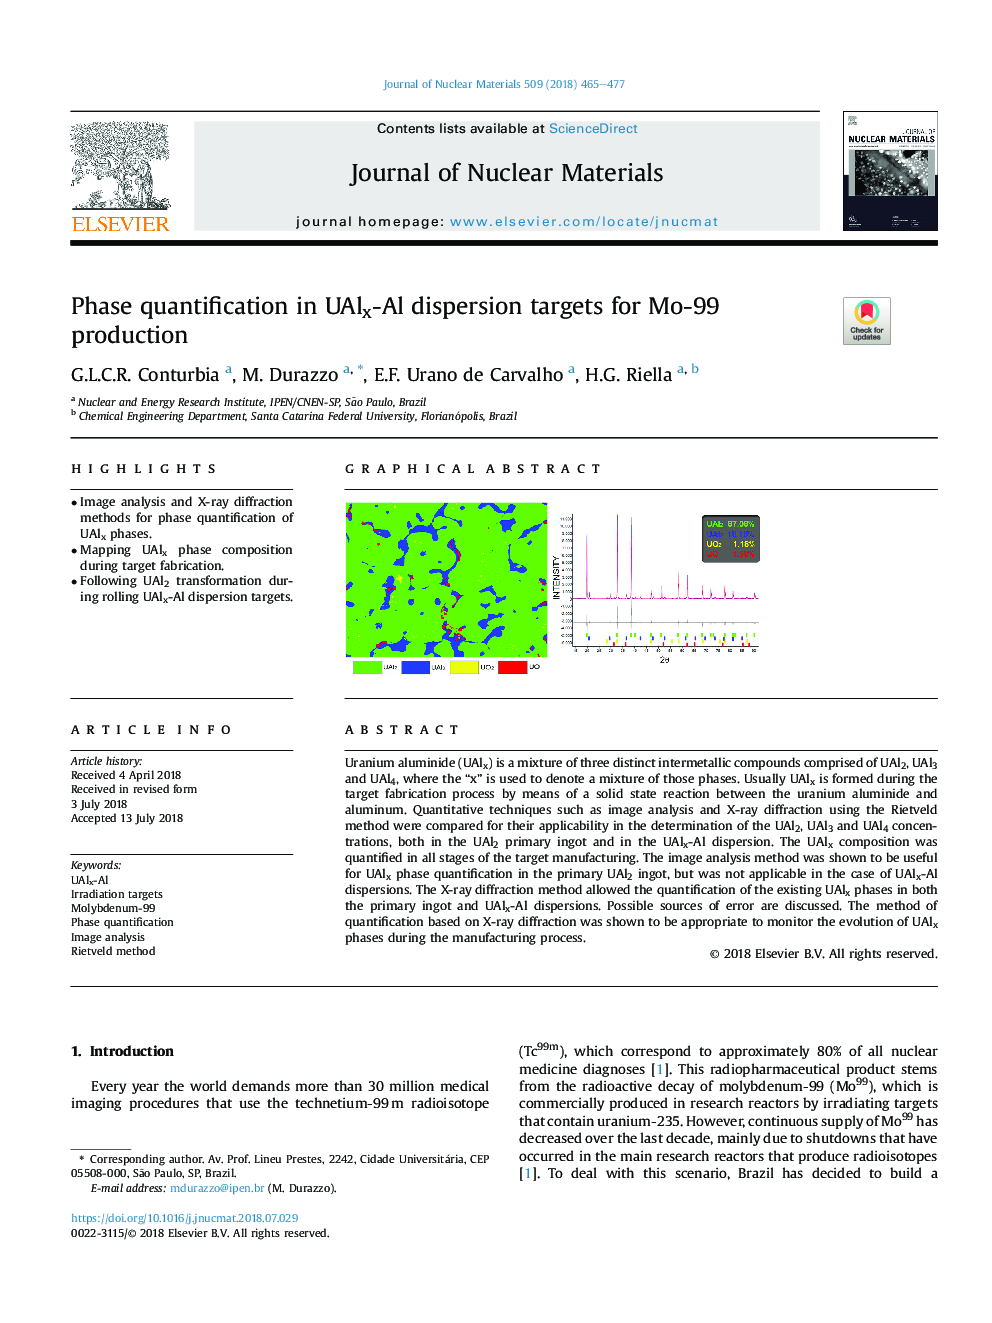 Phase quantification in UAlx-Al dispersion targets for Mo-99 production